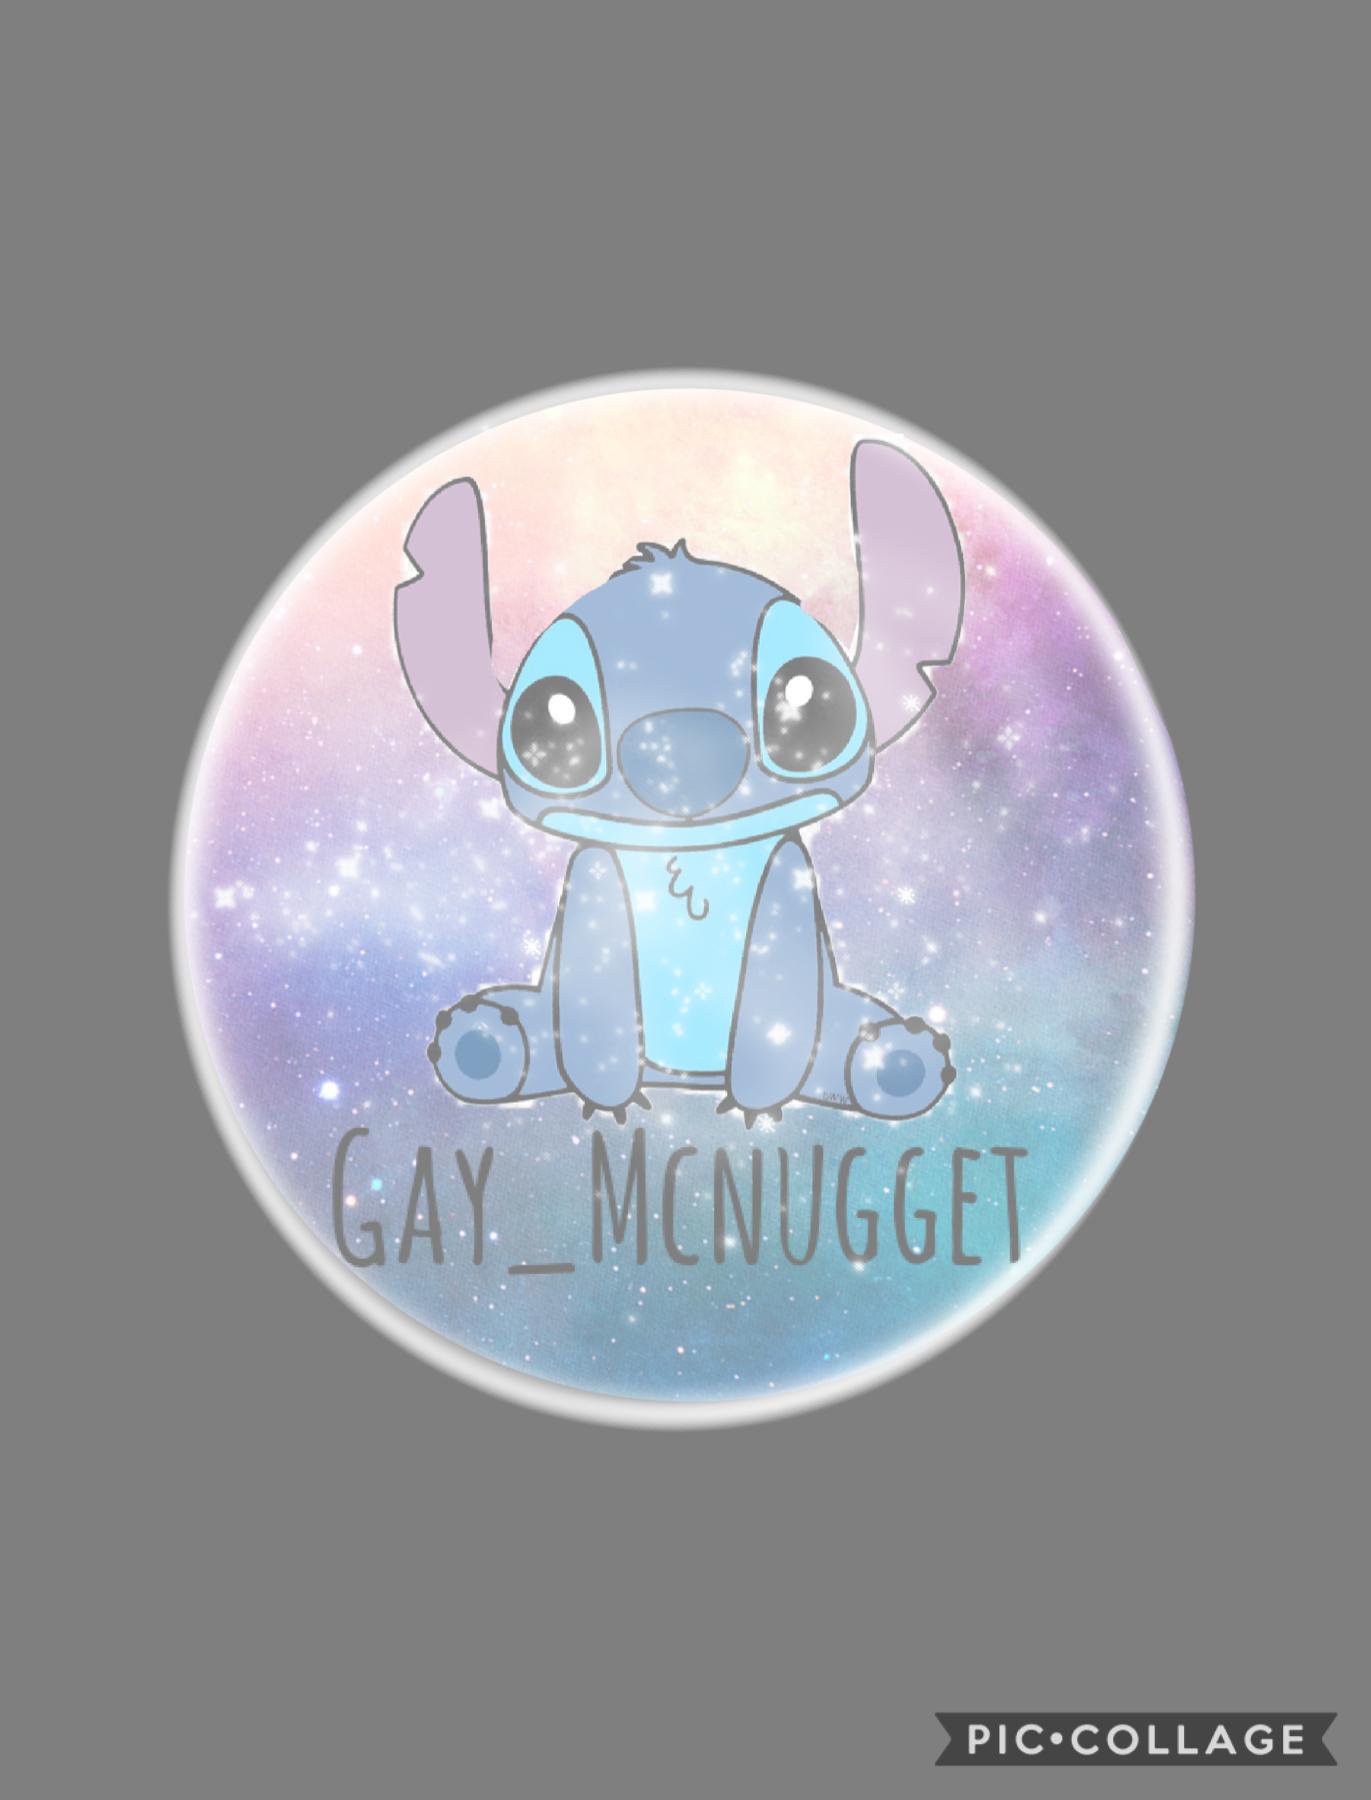 This is another entry for gay_Mcnuggets icon contest